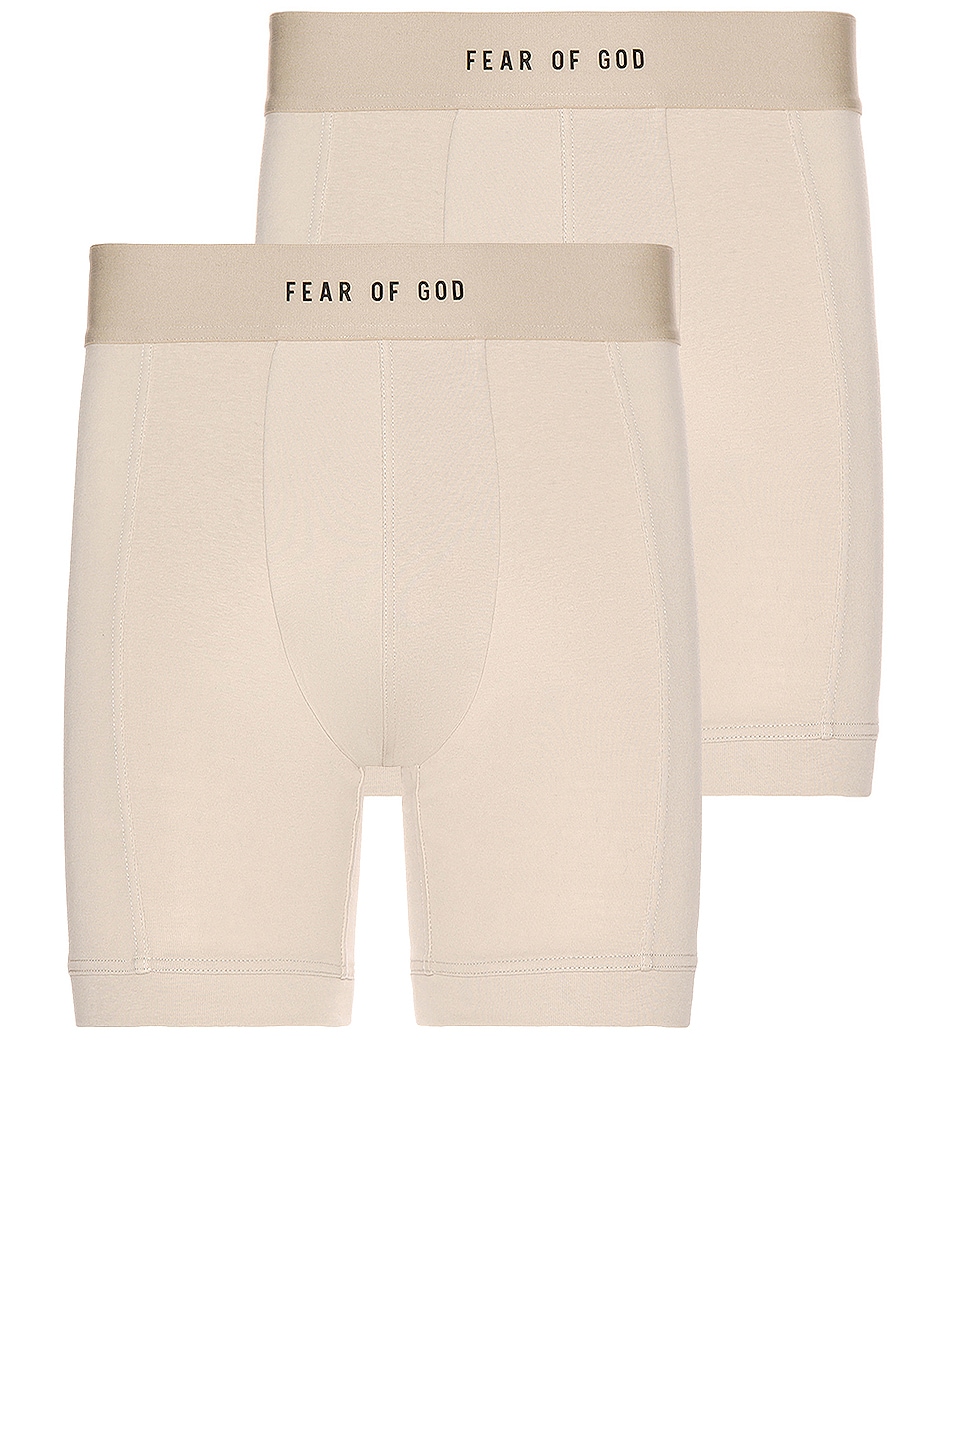 Image 1 of Fear of God 2 Pack Boxer Brief in Cement